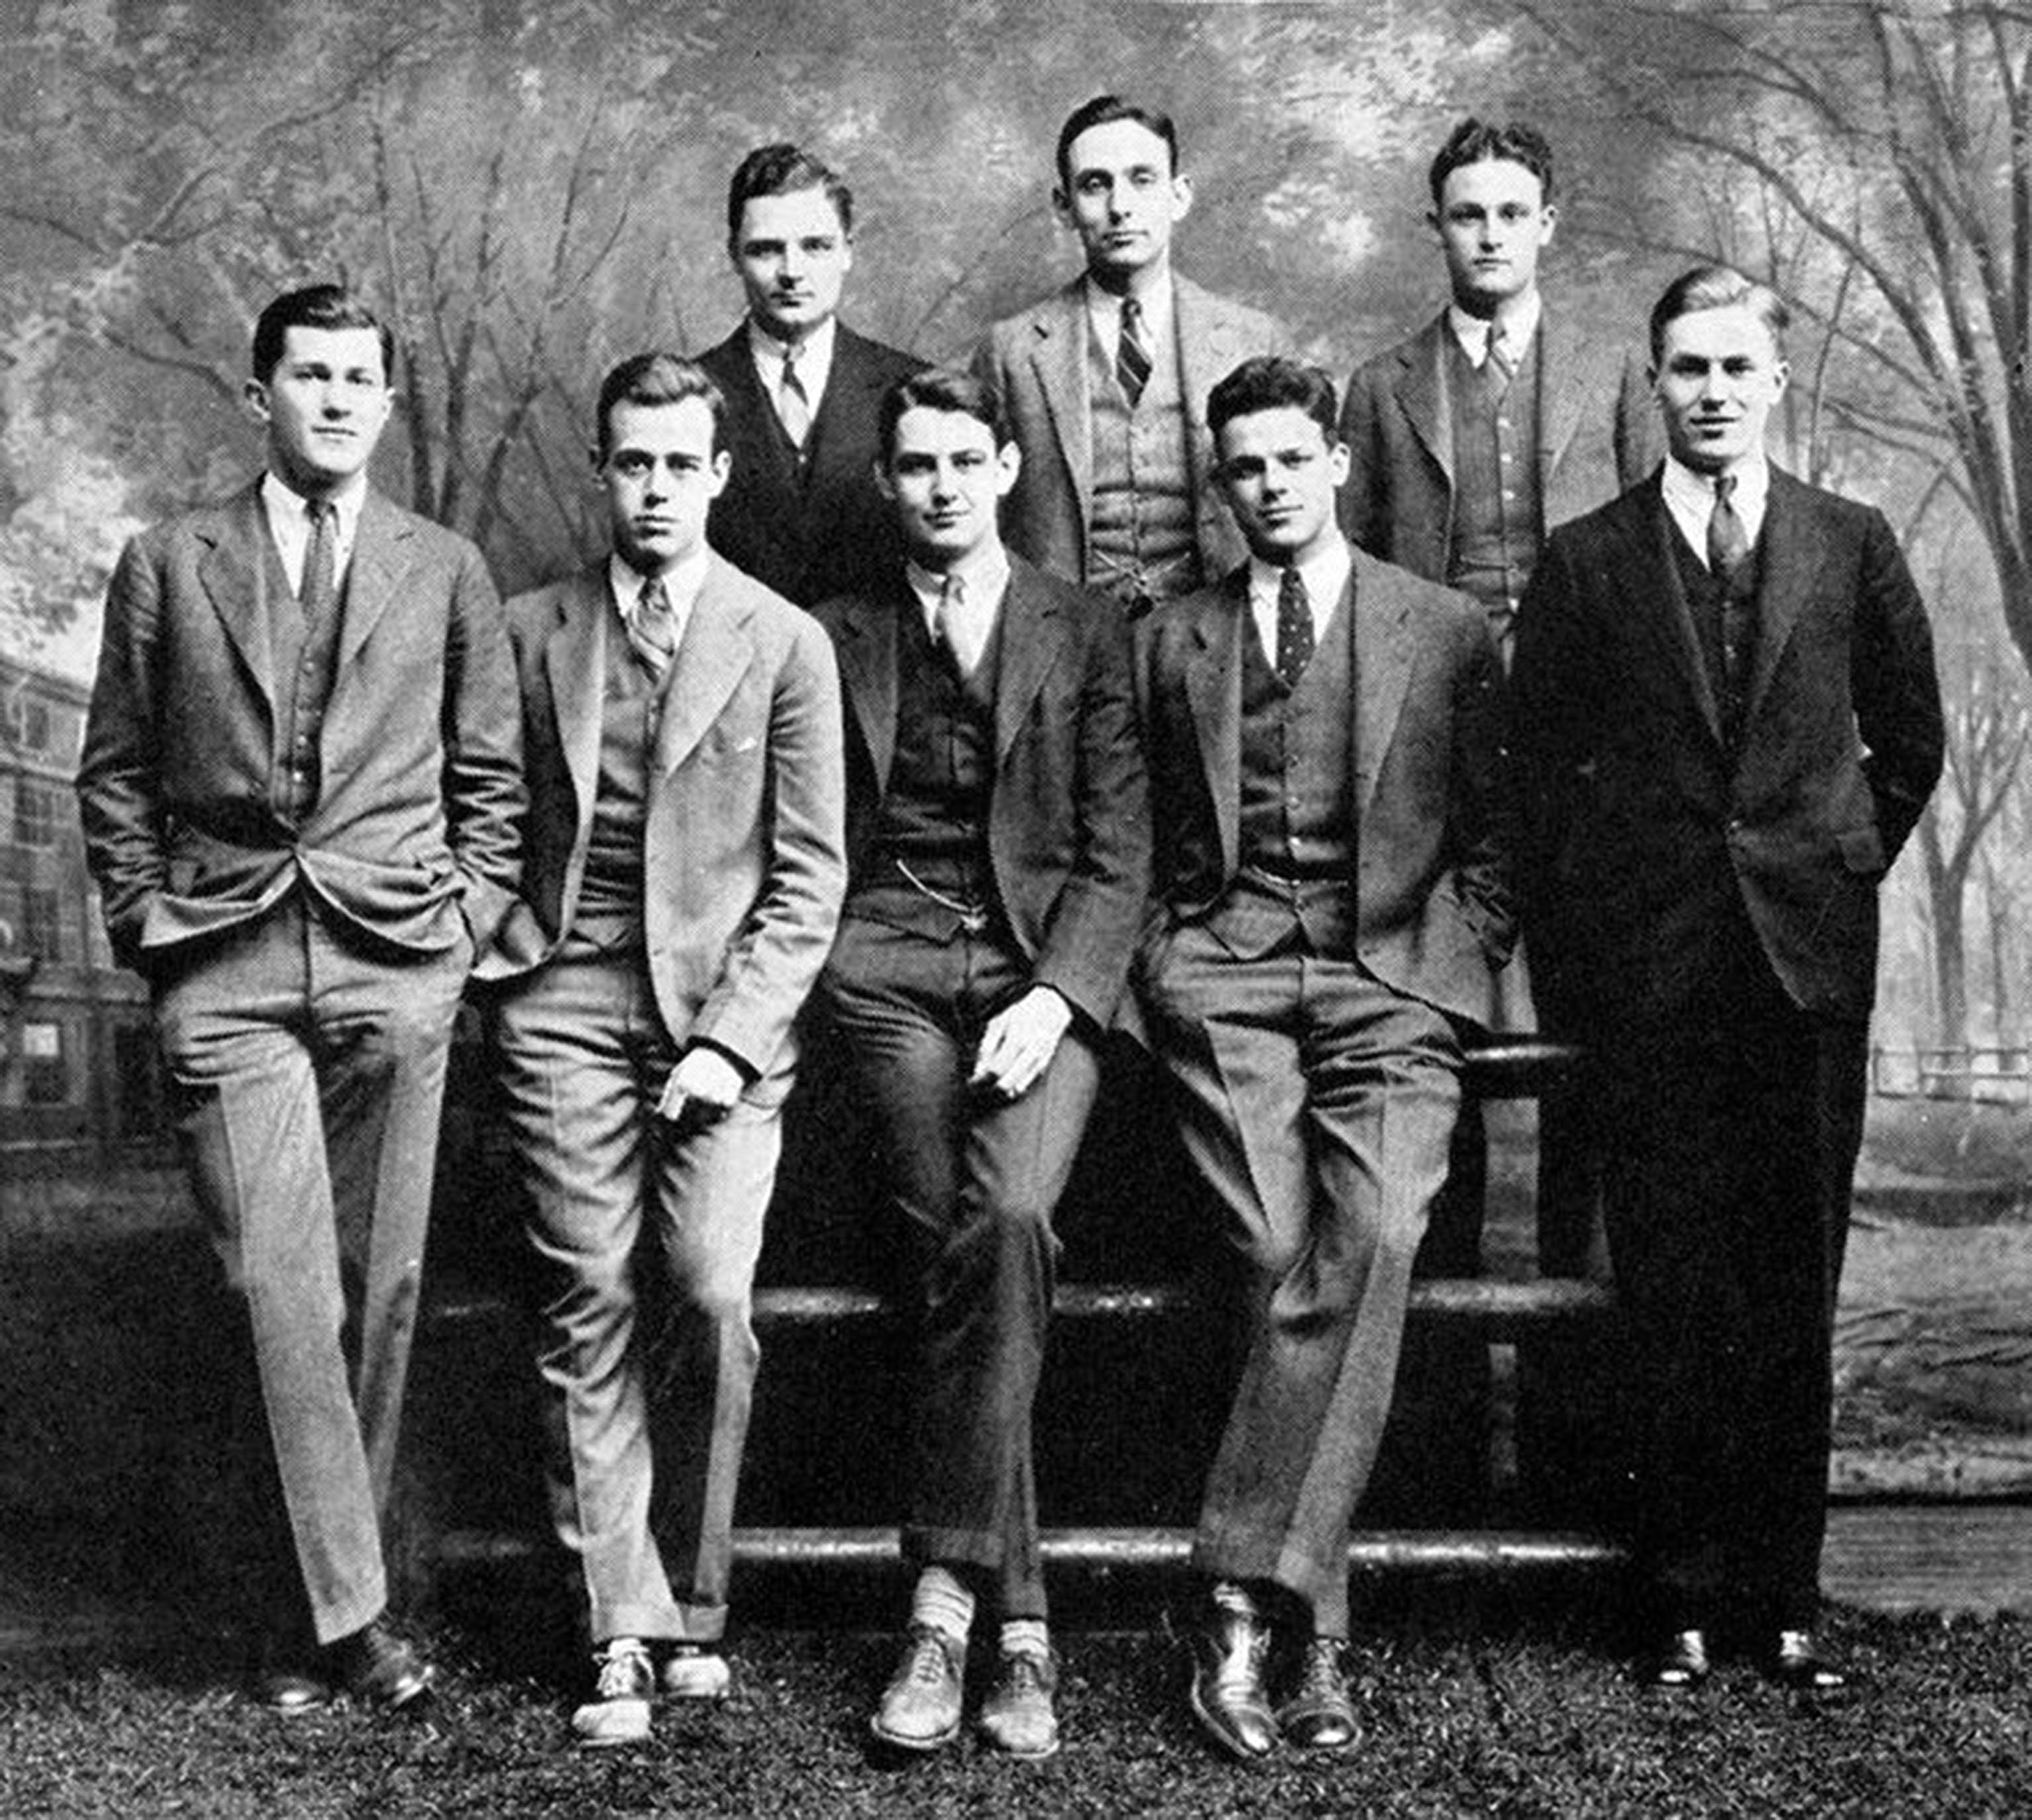 1920s Mens Fashion What did men wear in the 1920s